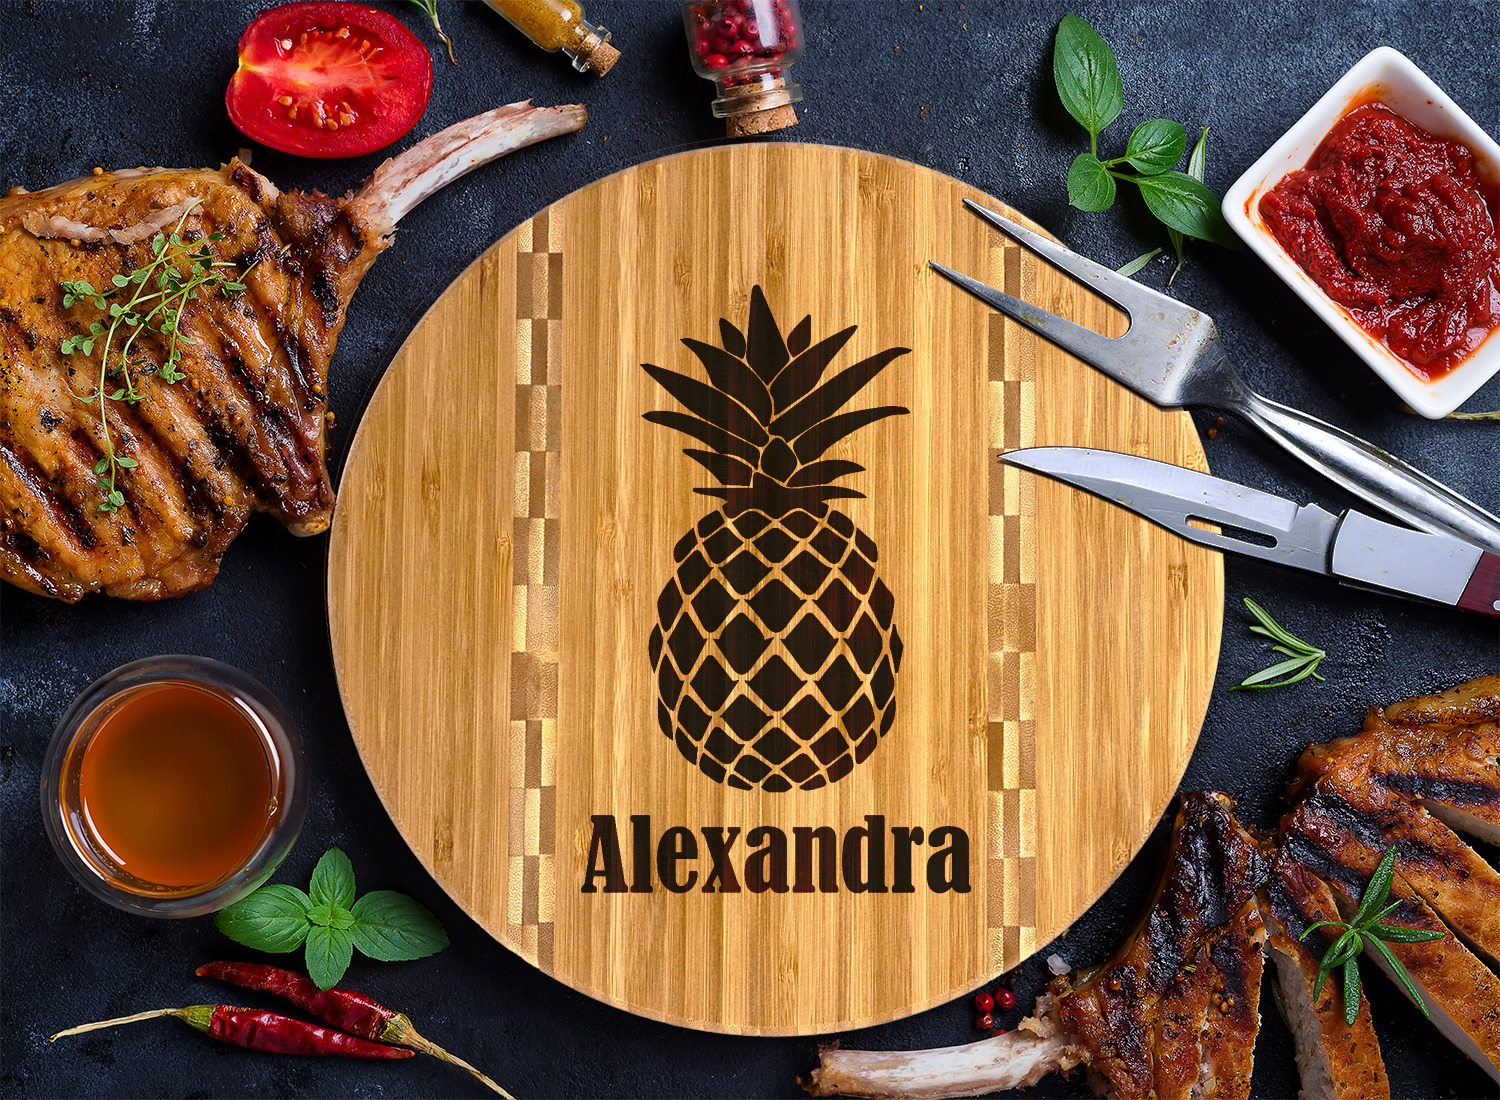 https://www.youcustomizeit.com/common/MAKE/1112526/Pineapples-Bamboo-Cutting-Boards-LIFESTYLE.jpg?lm=1658265523